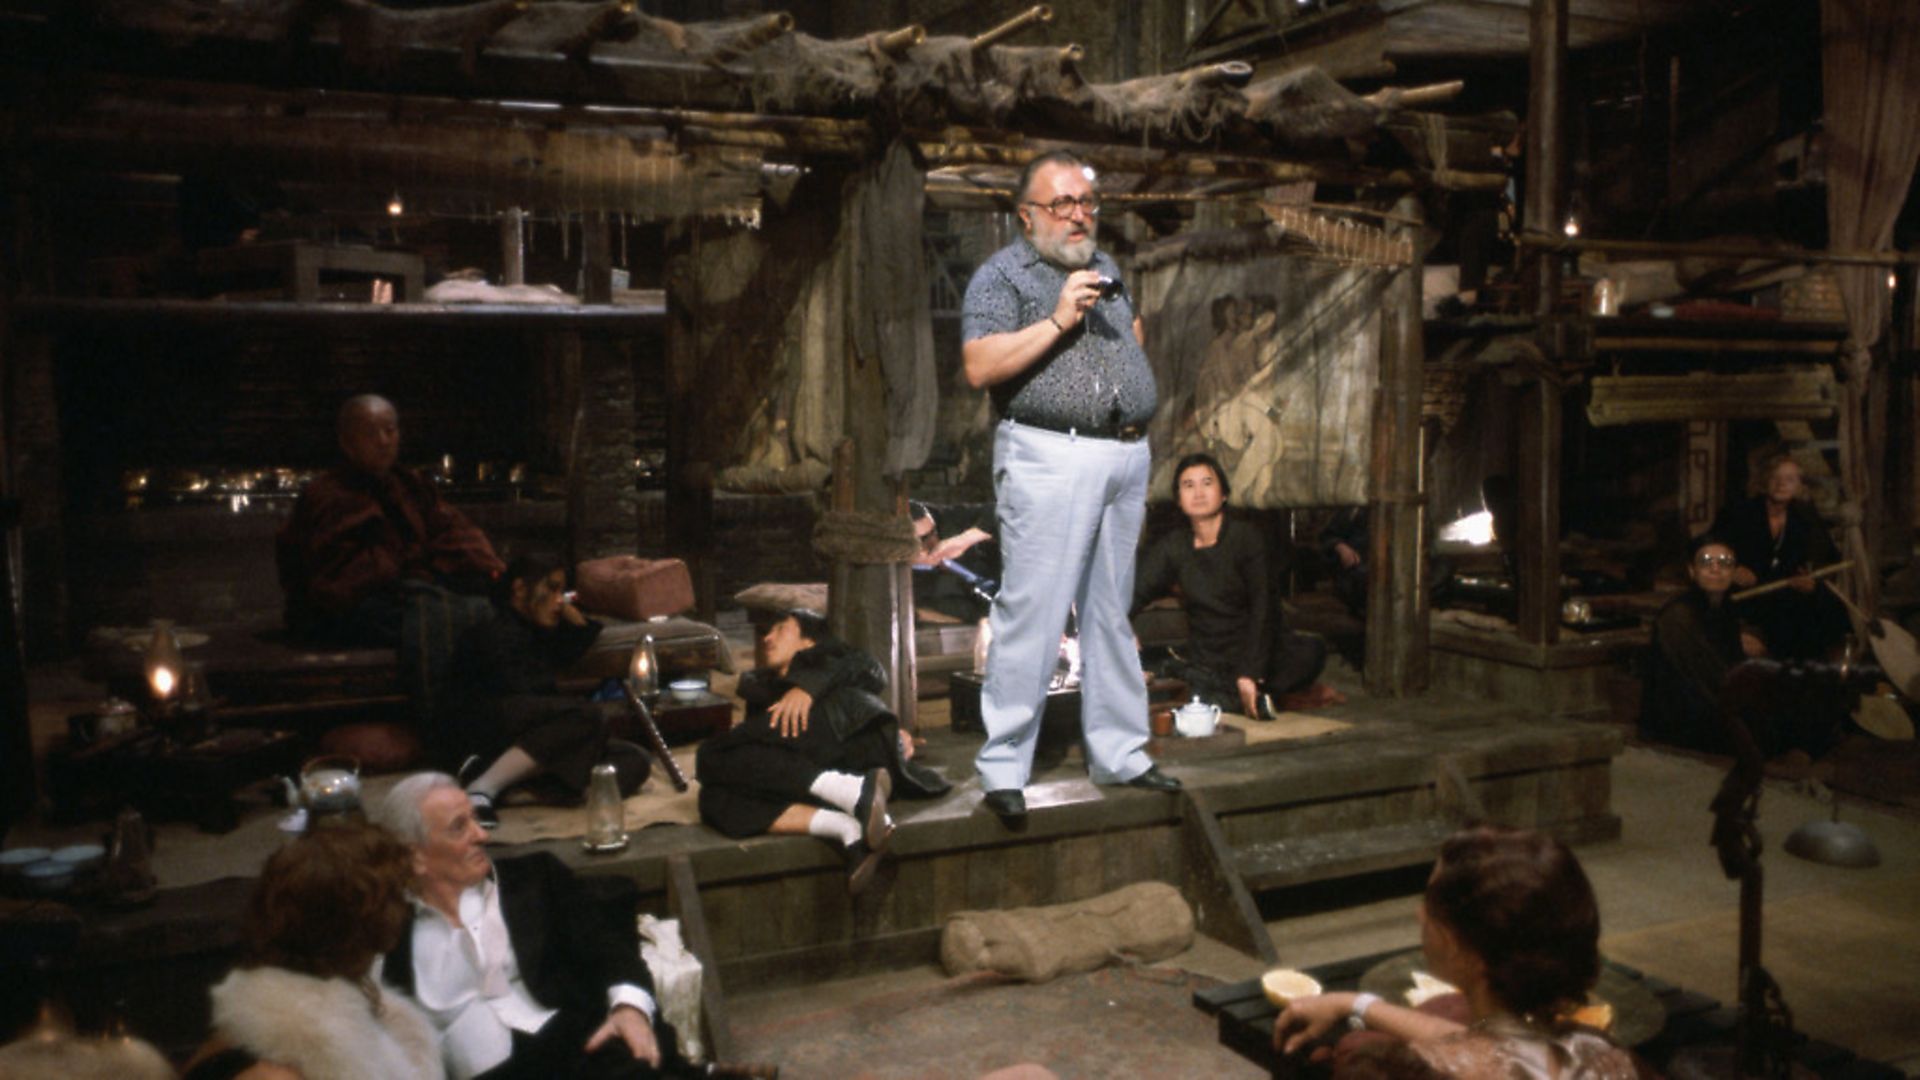 Director Sergio Leone and cast members on the set of the movie "Once Upon a Time in America". (Photo by Vittoriano Rastelli/CORBIS/Corbis via Getty Images) - Credit: Corbis via Getty Images